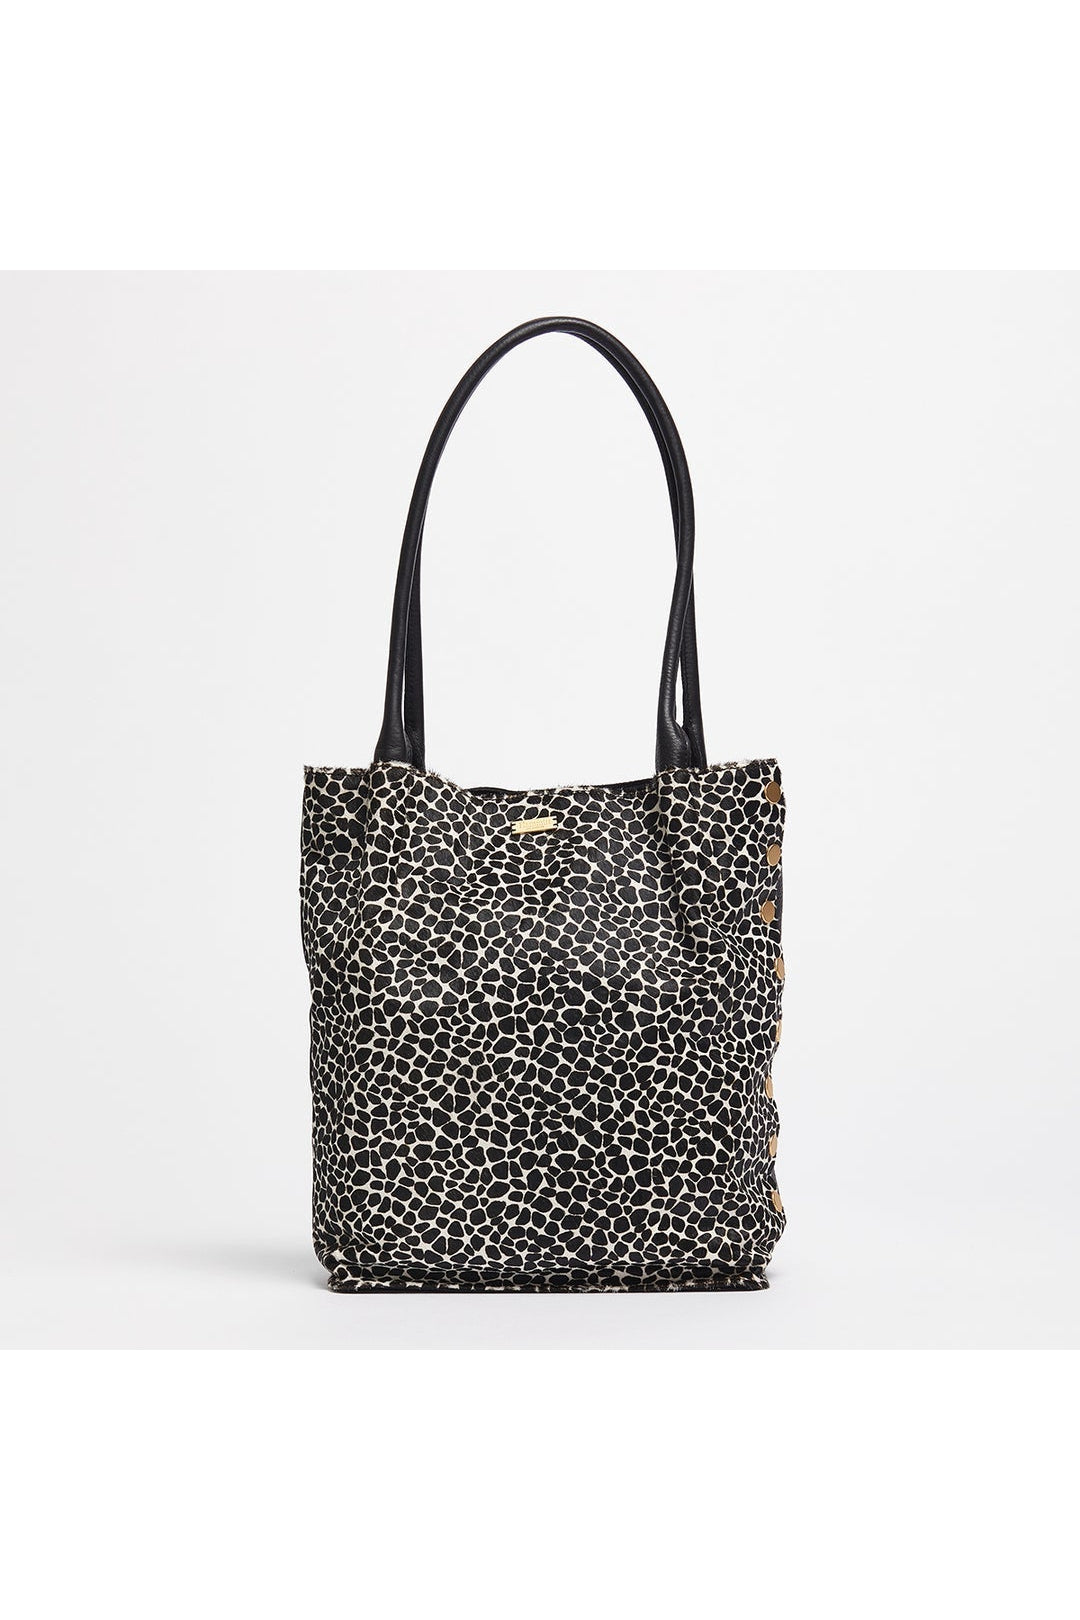 Brushed Canvas Totes - Gold, Black, Silver